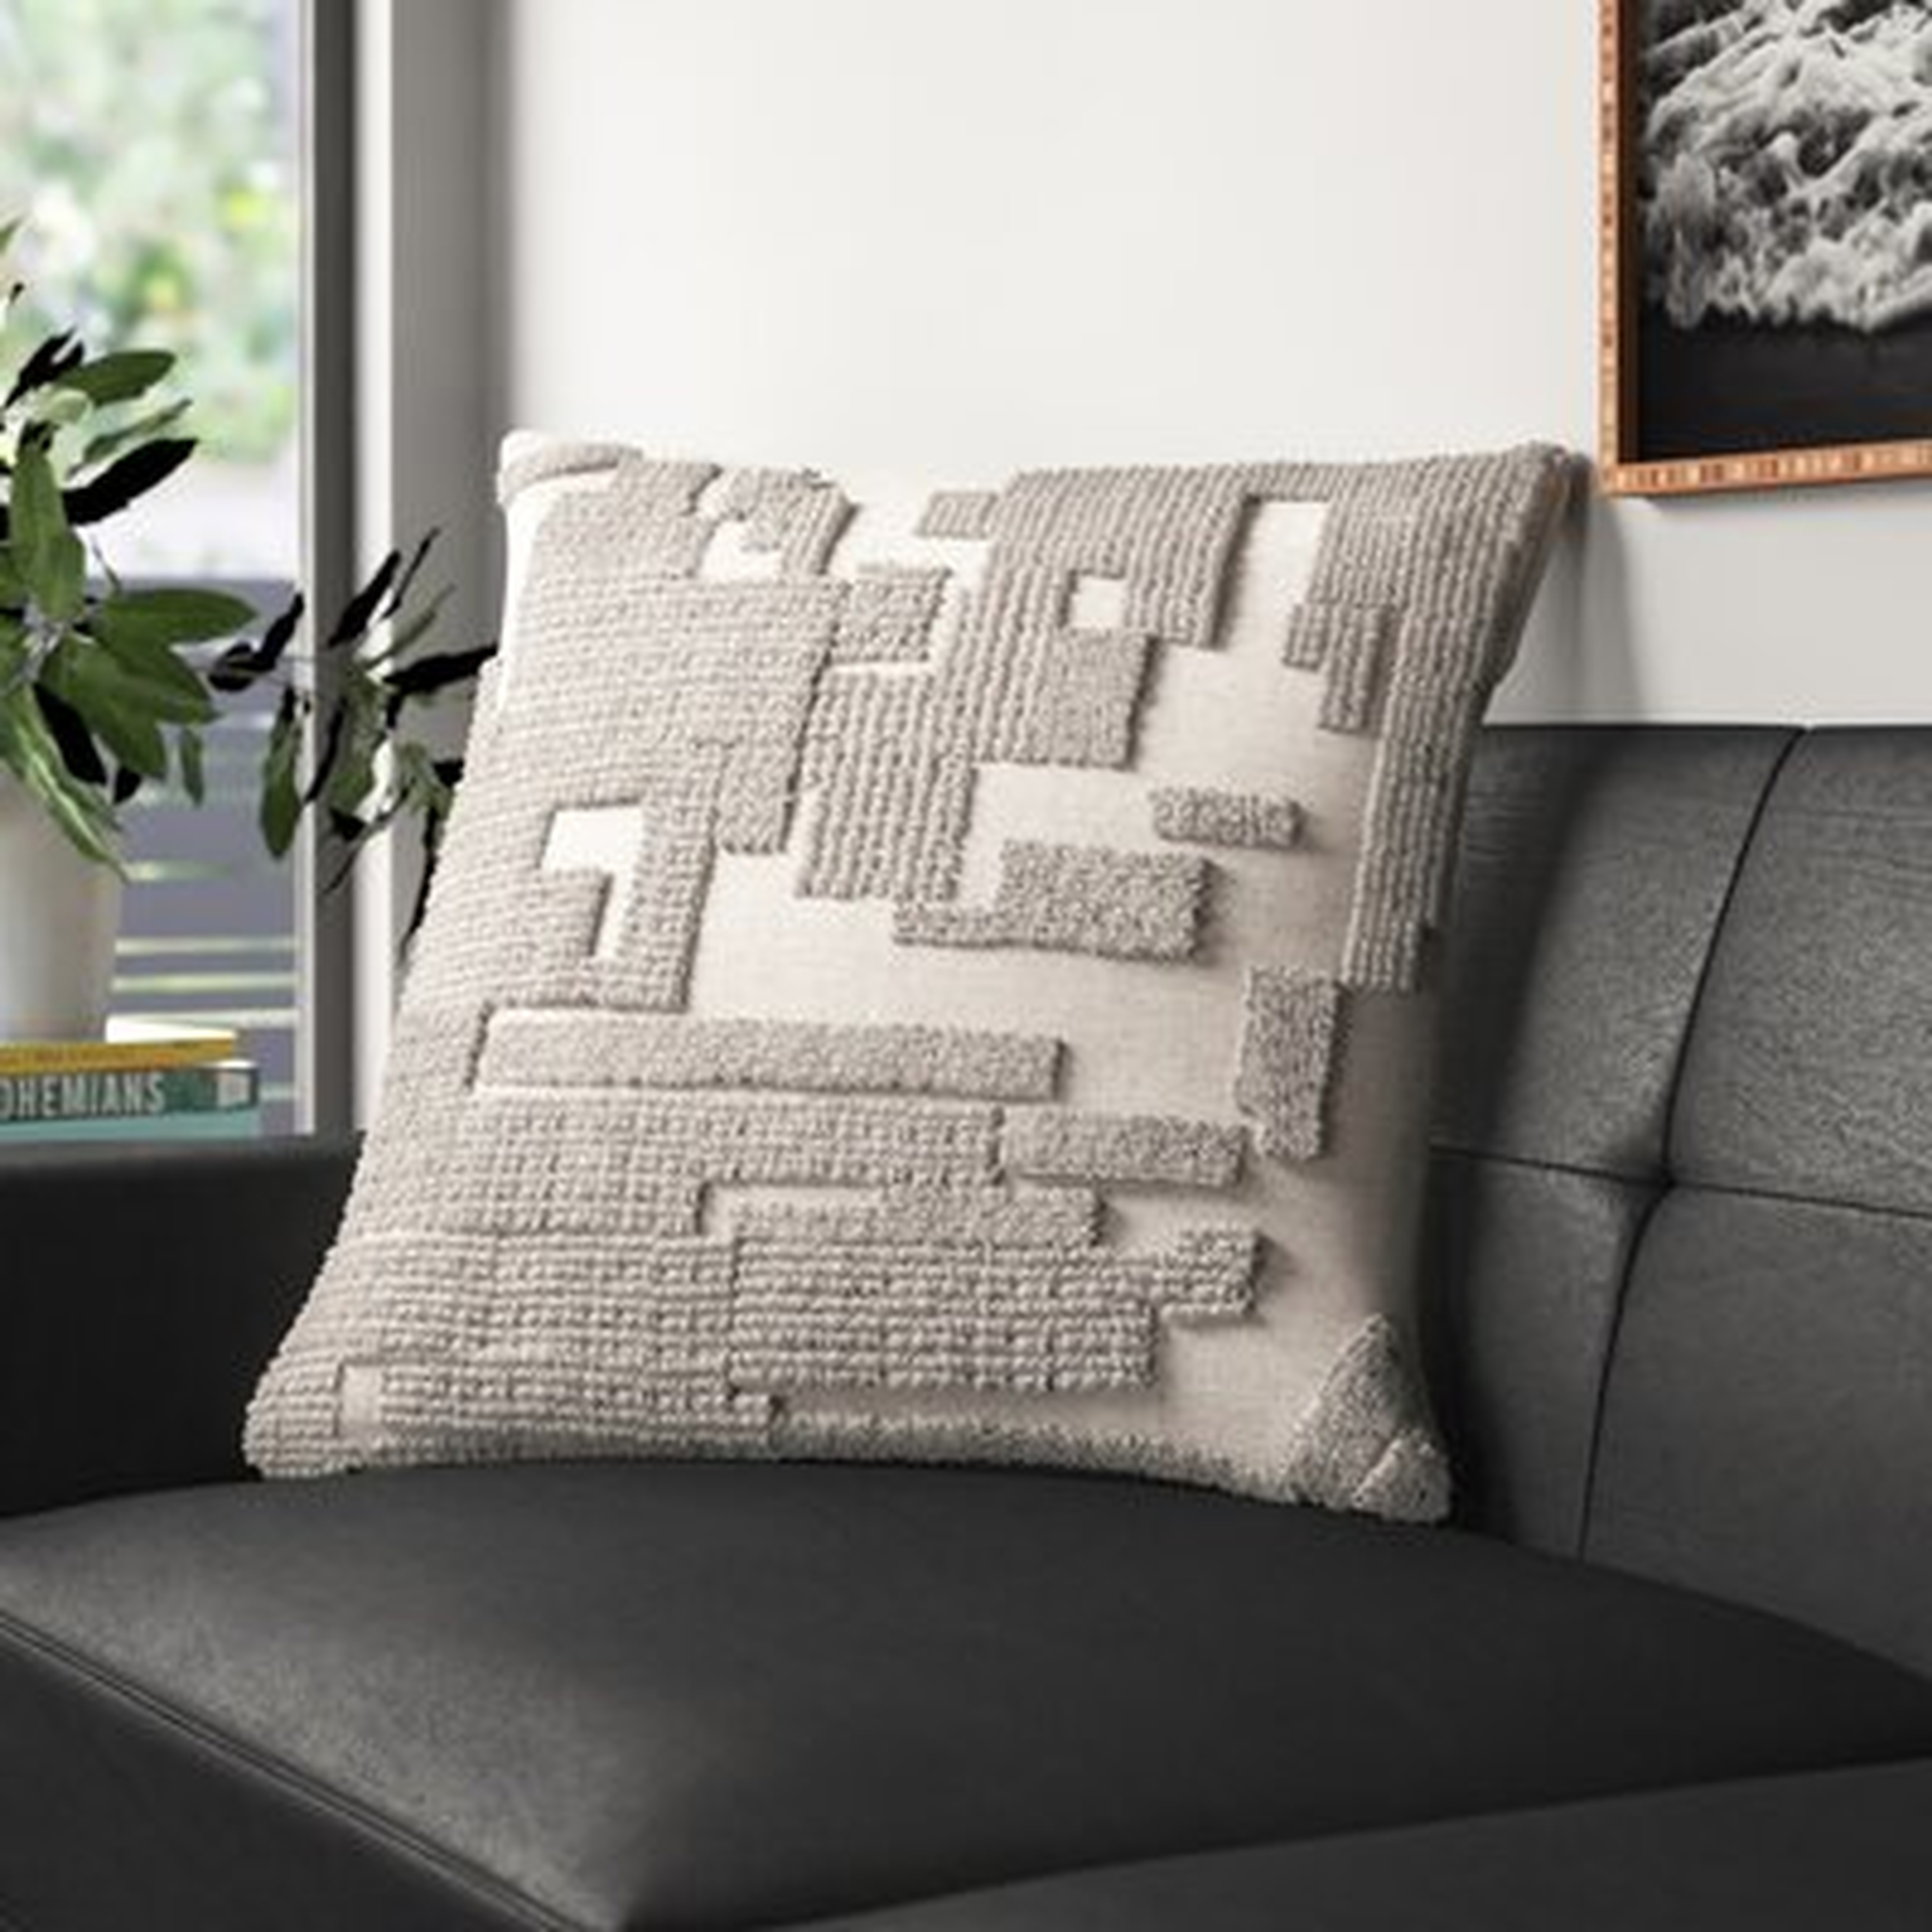 Milford Textured Square Cotton Pillow Cover & Insert - AllModern